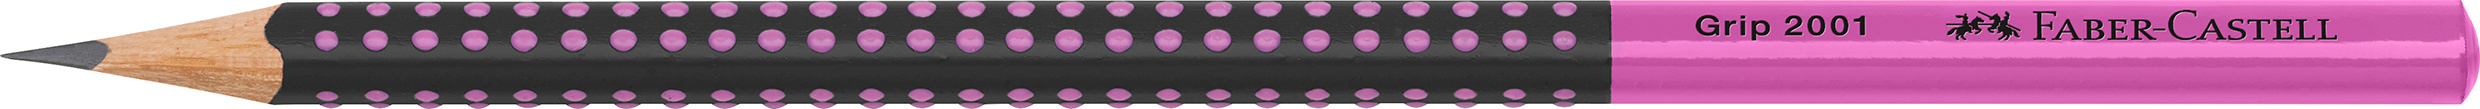 FABER-CASTELL Crayon Grip 2001 517011 Two Tone noir/pink